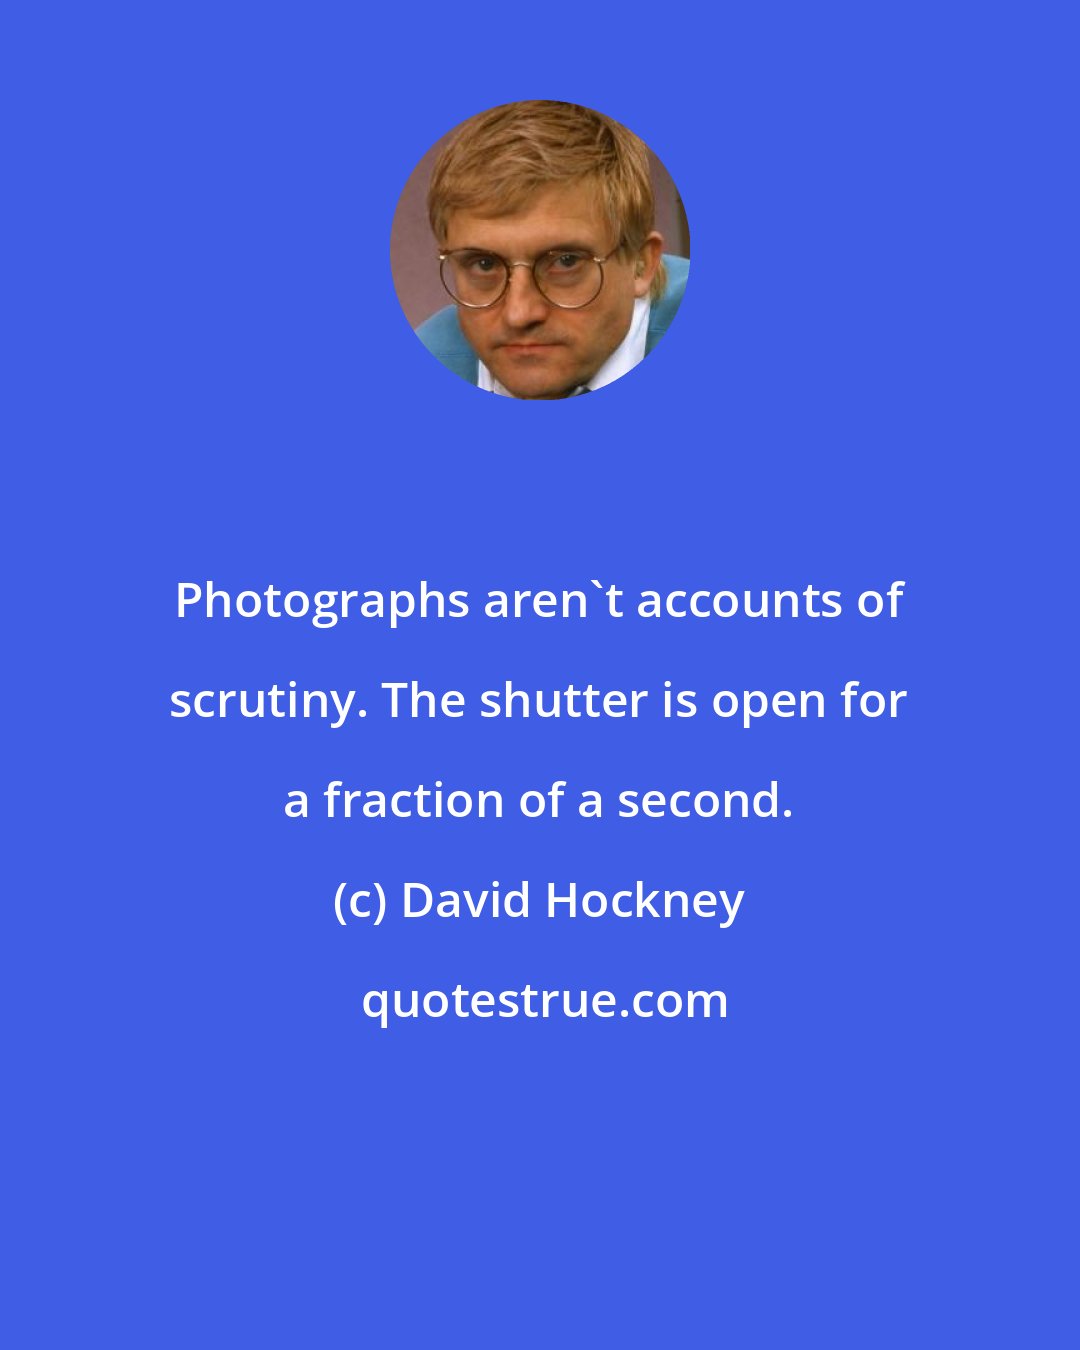 David Hockney: Photographs aren't accounts of scrutiny. The shutter is open for a fraction of a second.